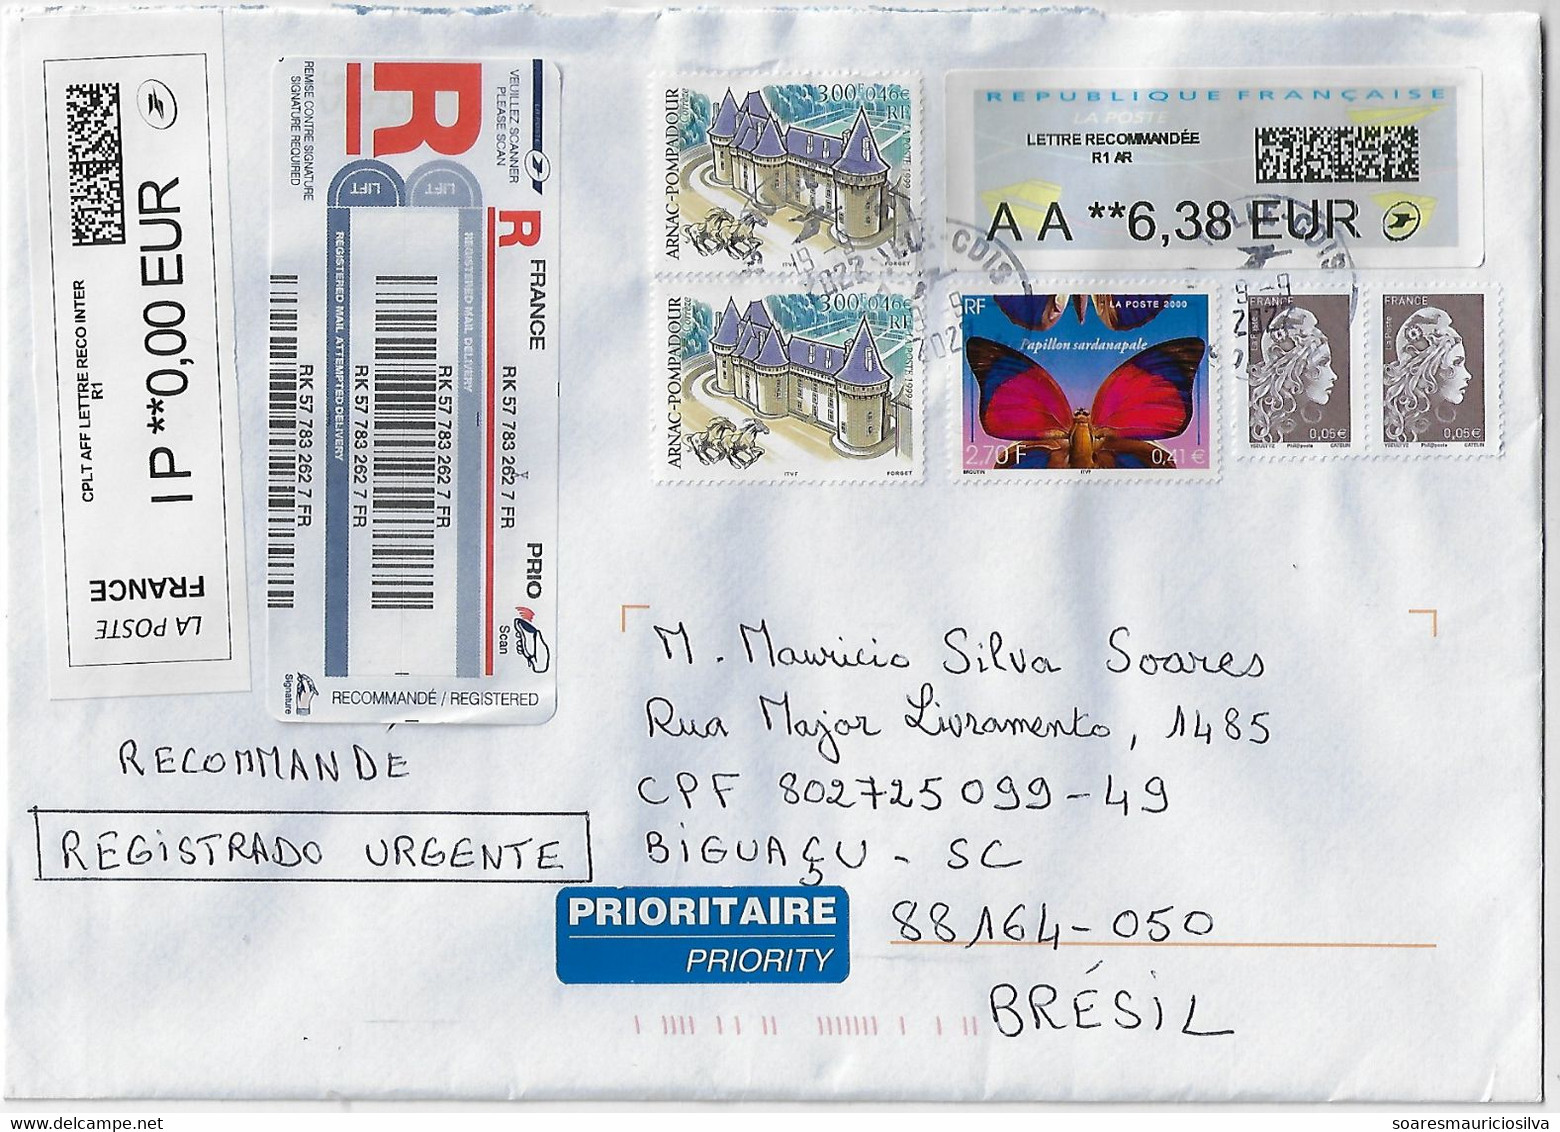 France 2022 Barcode Registered Cover From Naves To Brazil Franking Label ATM Origami Paper Airplane Electronic Sorting - 2000 Type « Avions En Papier »